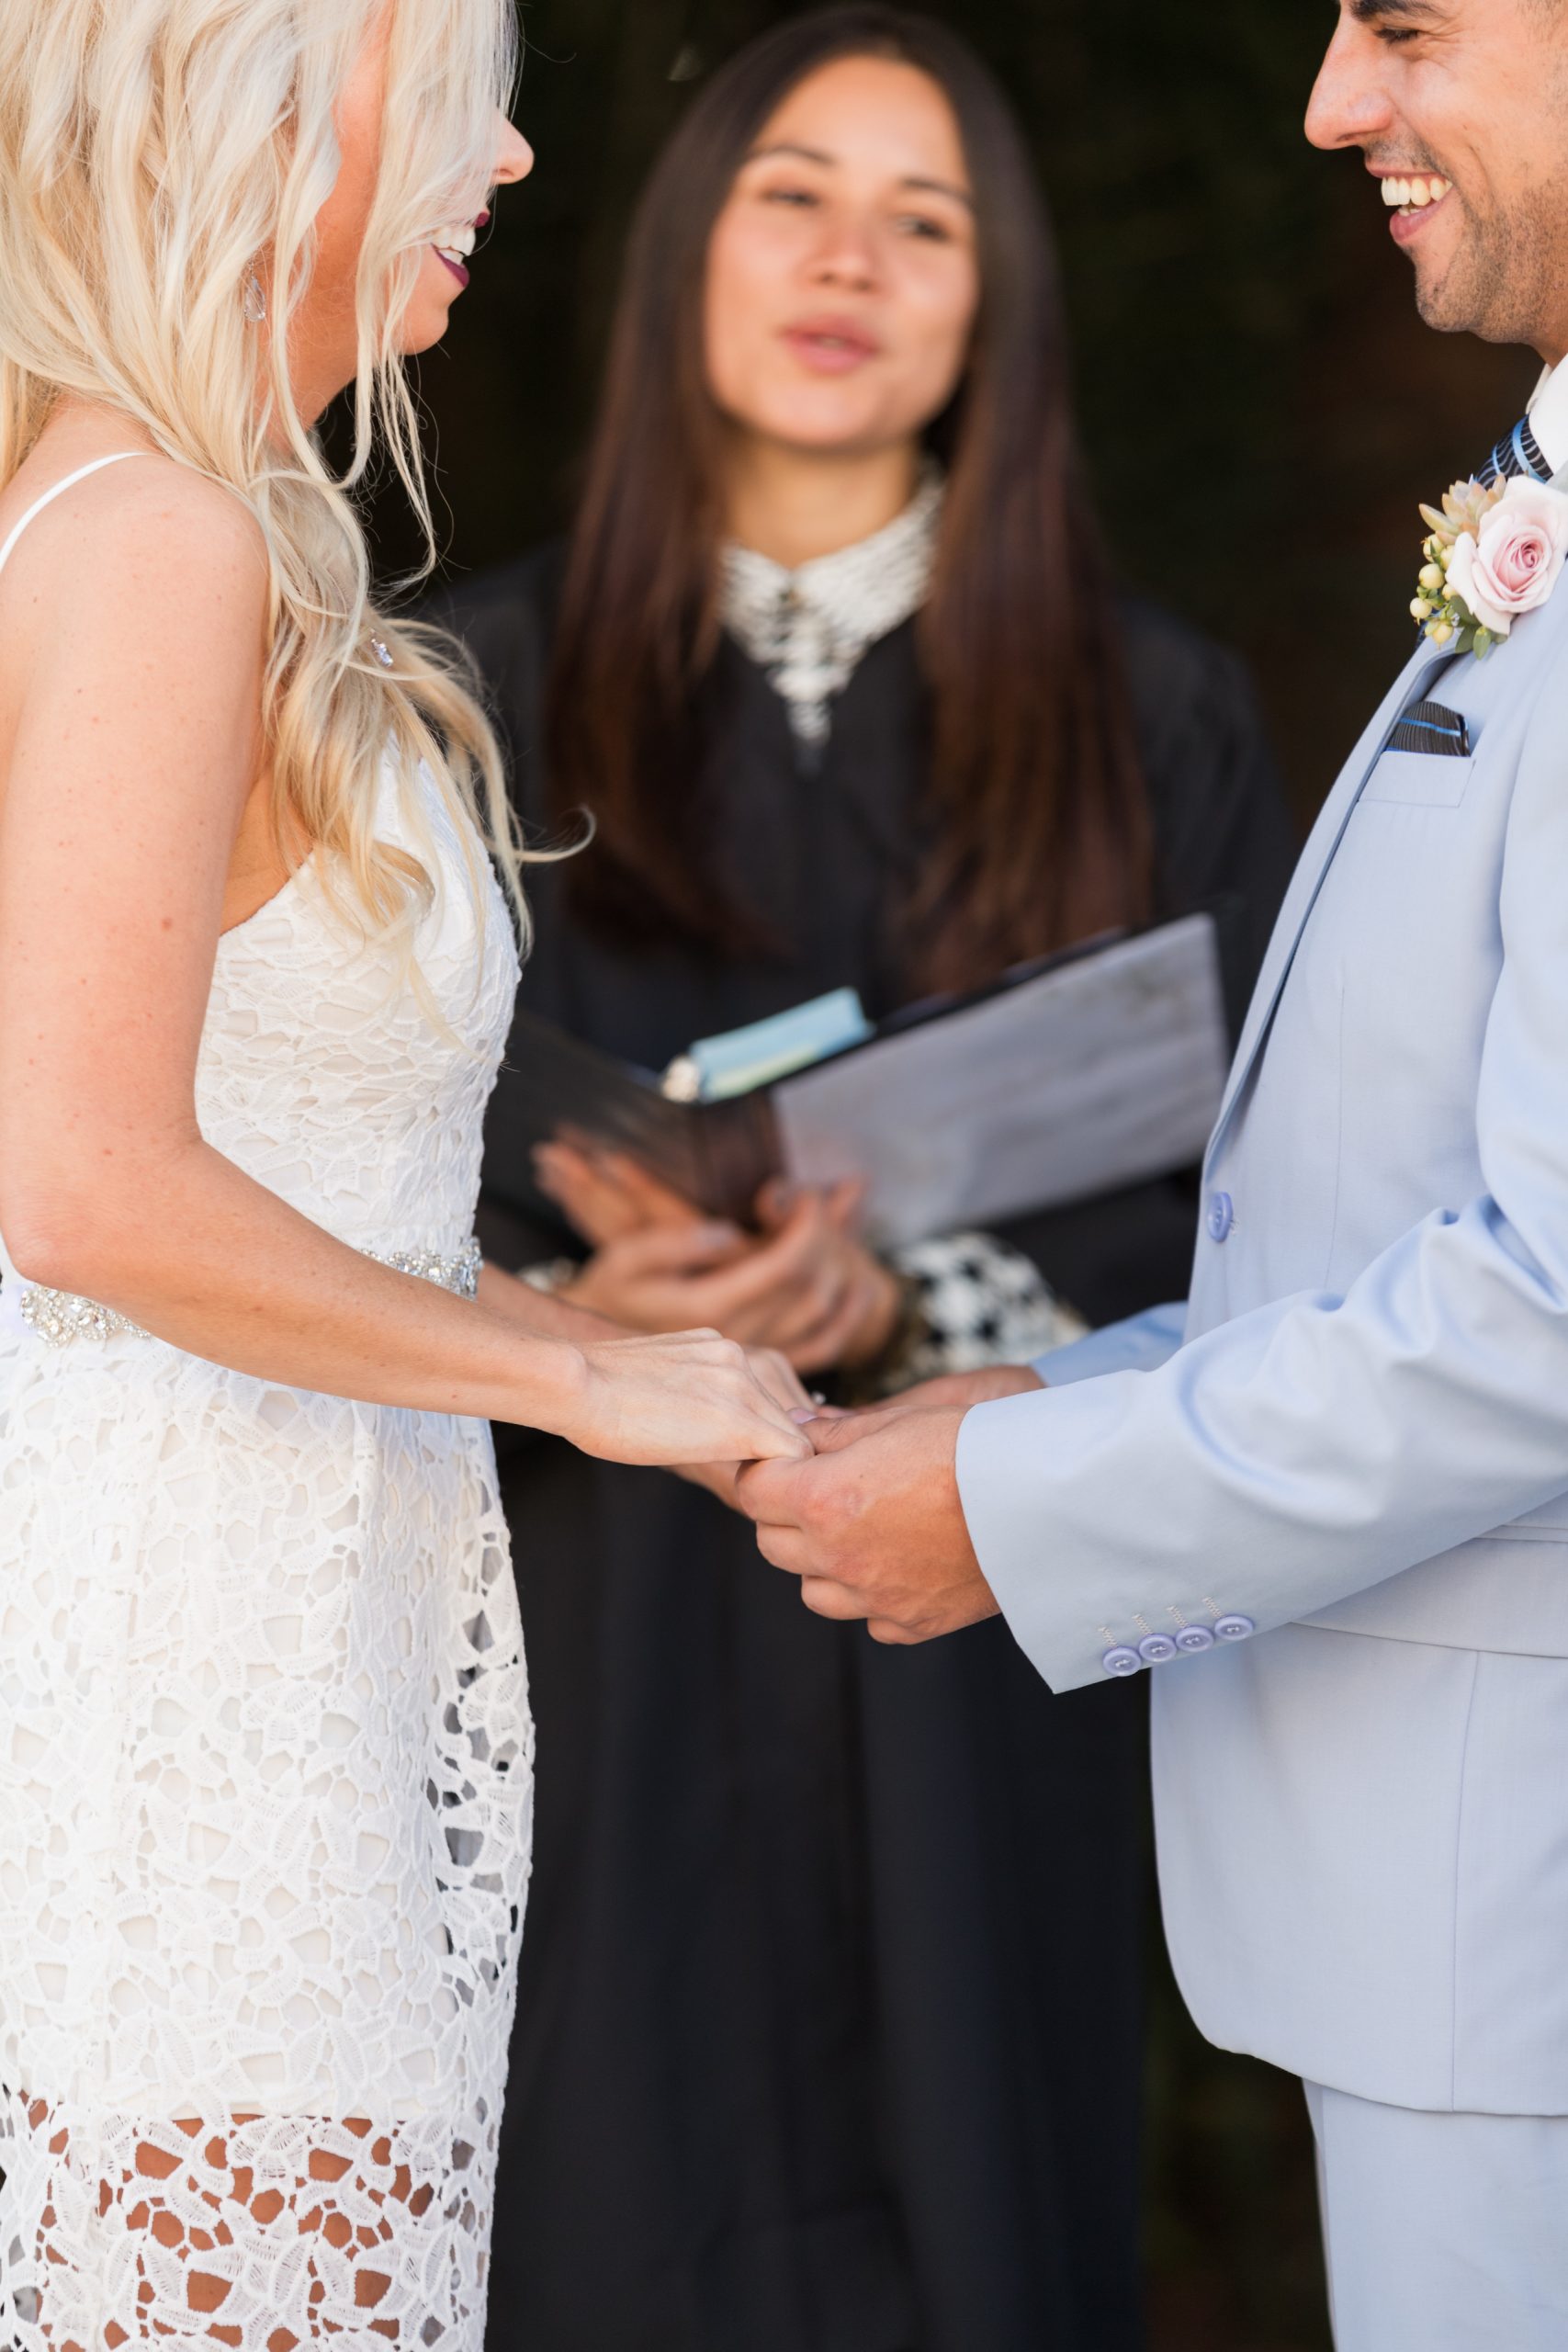 5 Reasons You Should Have a Courthouse Wedding in San Diego